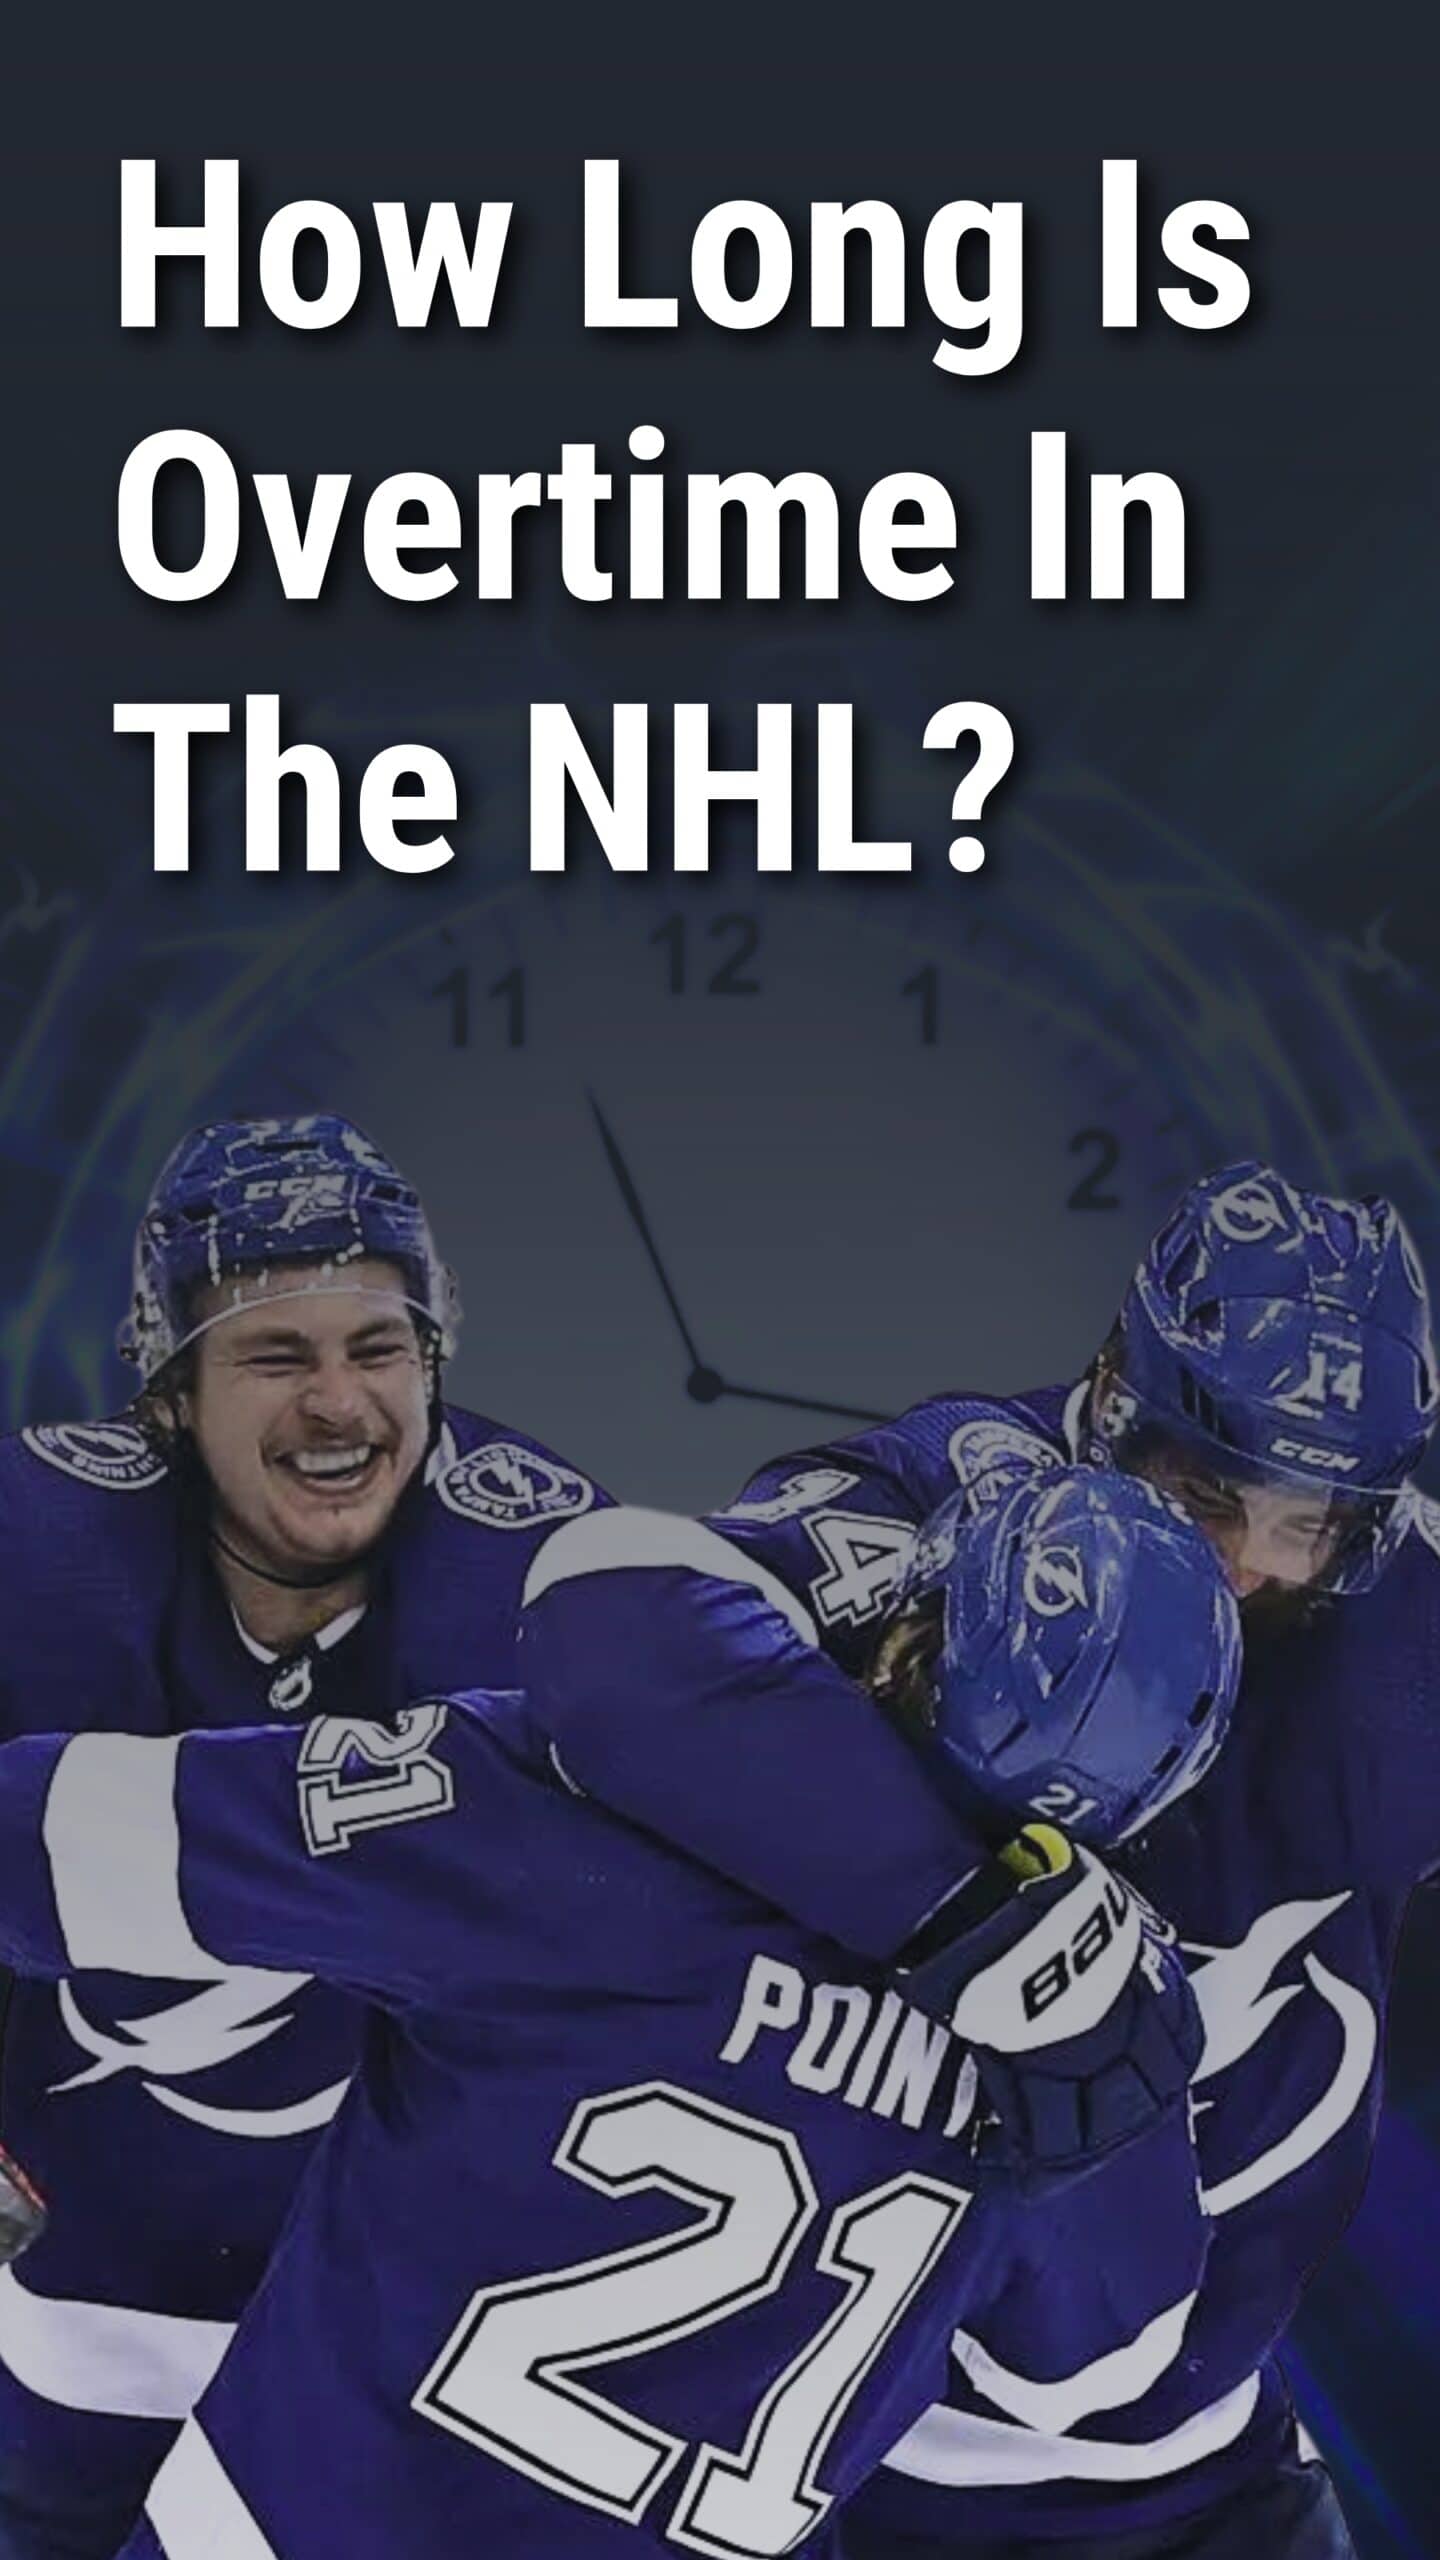 How Long Is Overtime In The NHL?